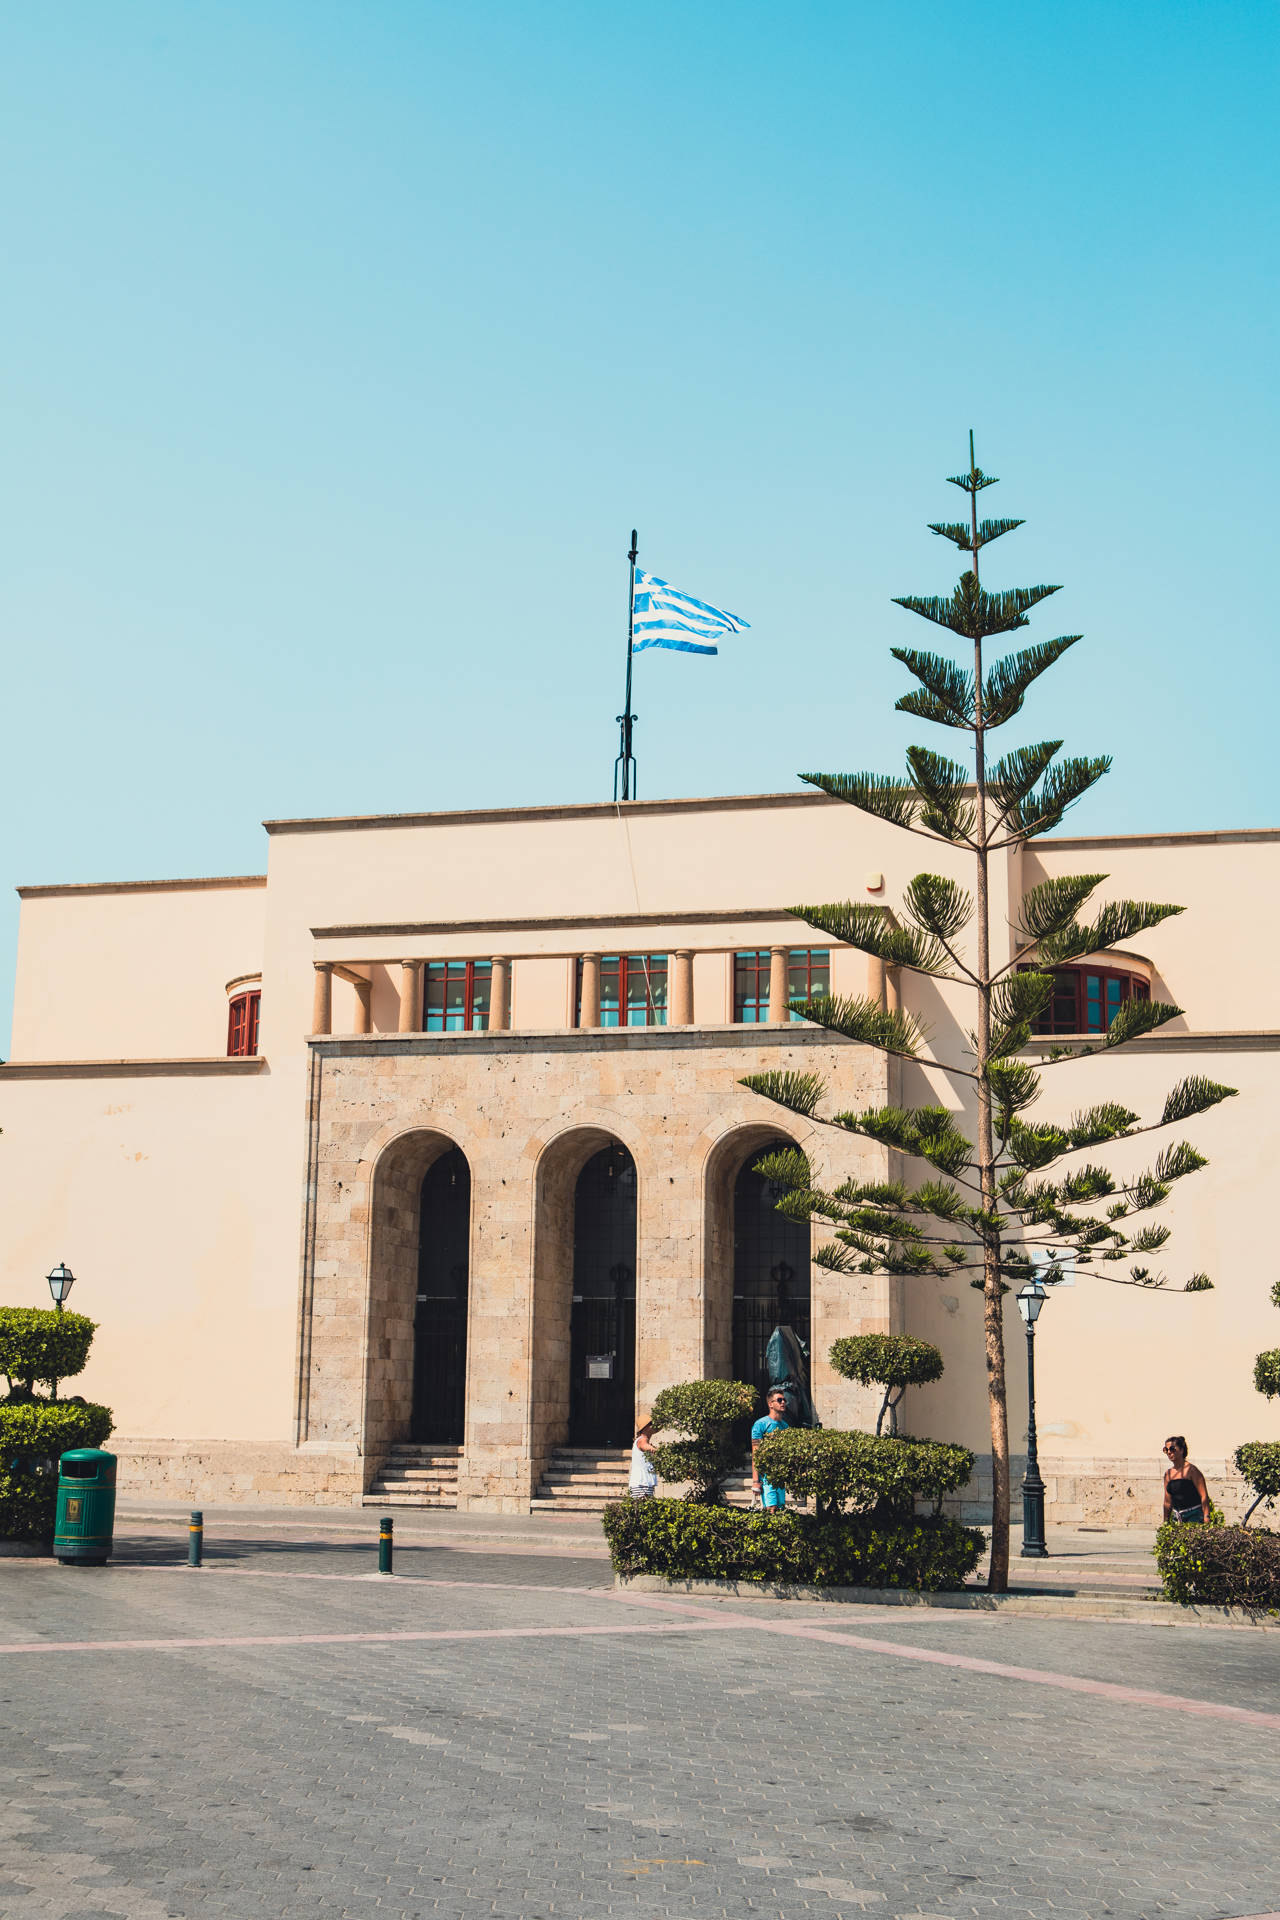 The Archaeological Museum of Kos